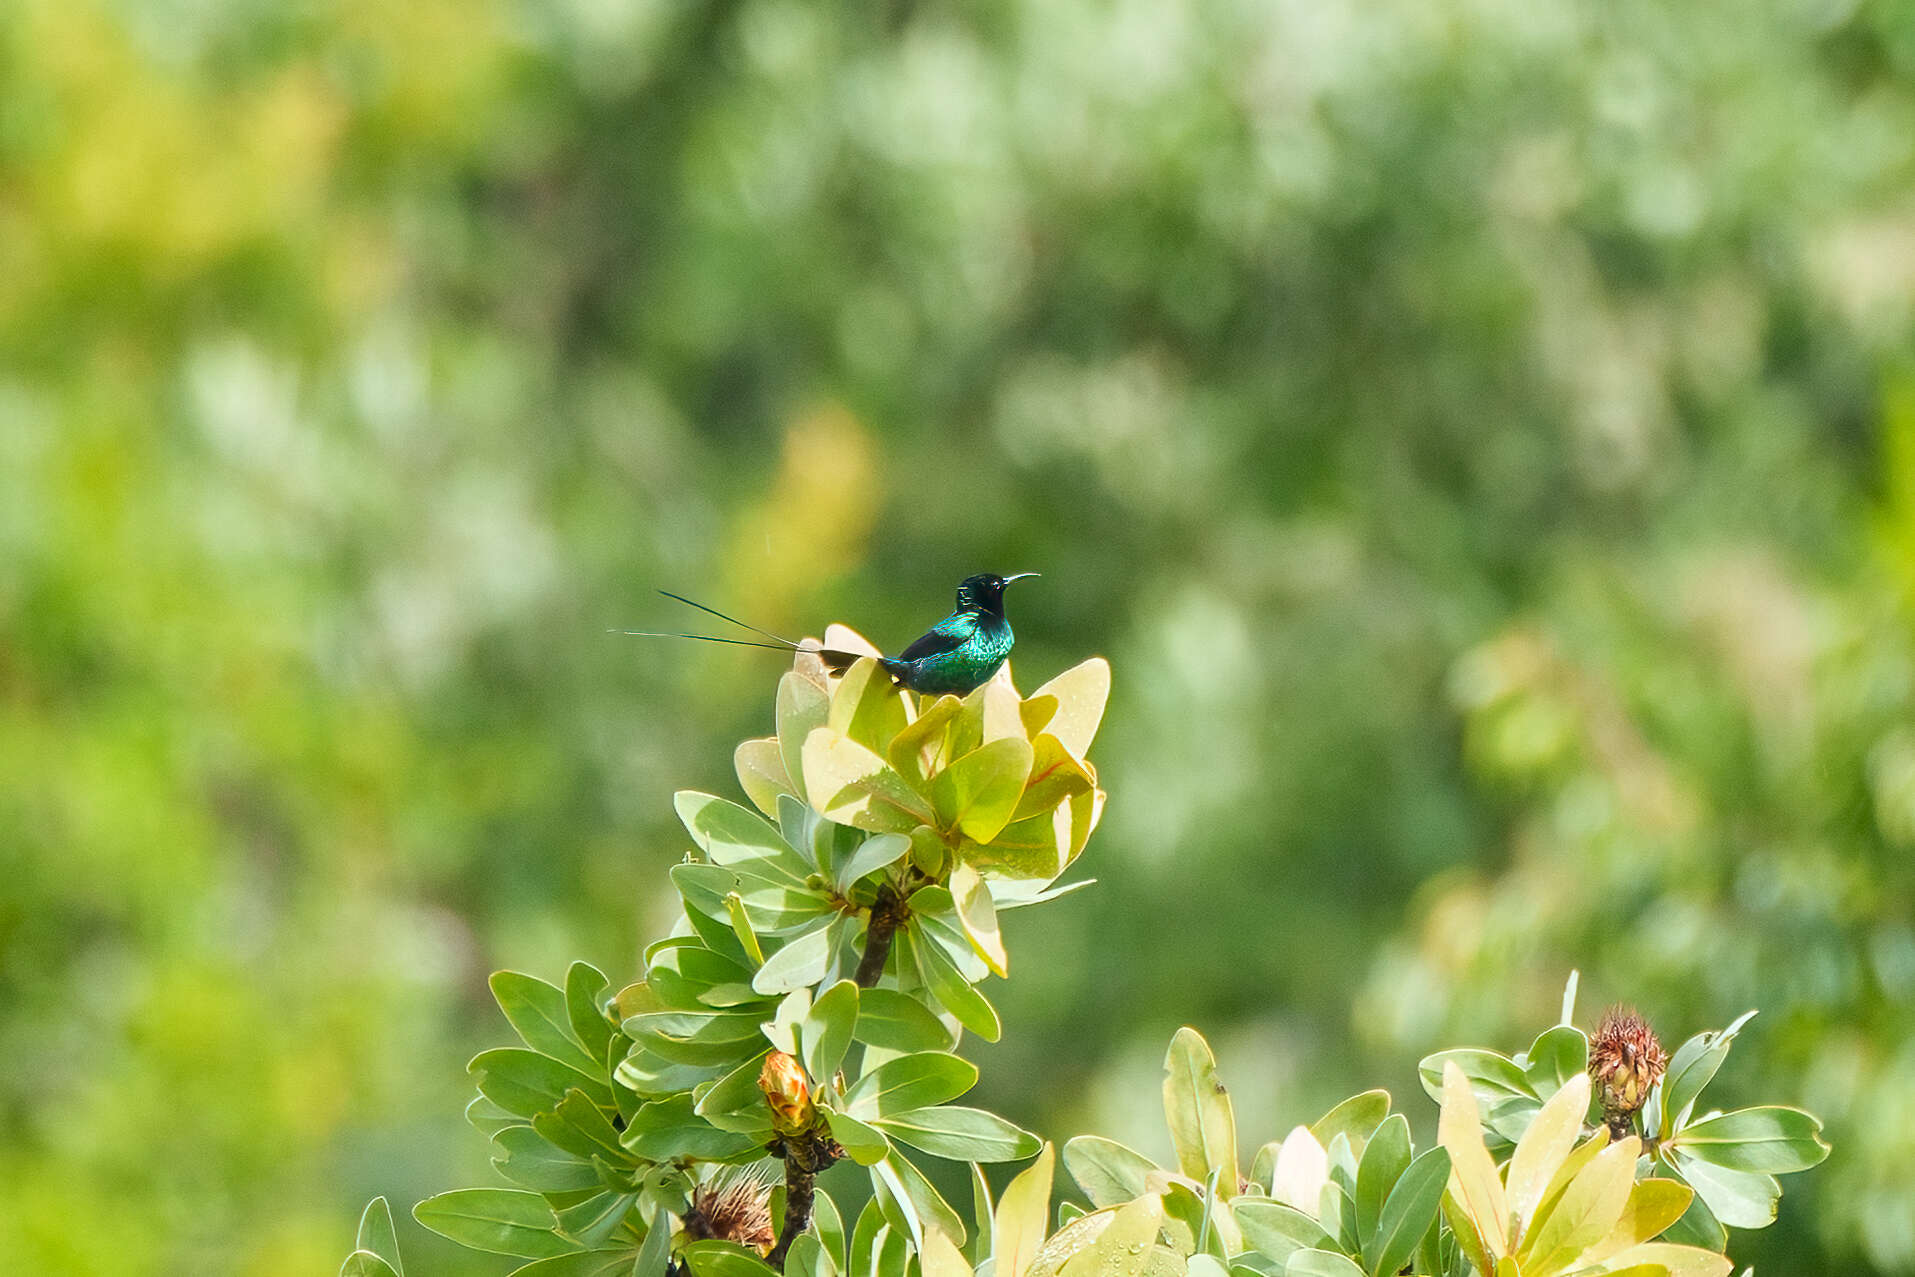 Image of Red-tufted Sunbird